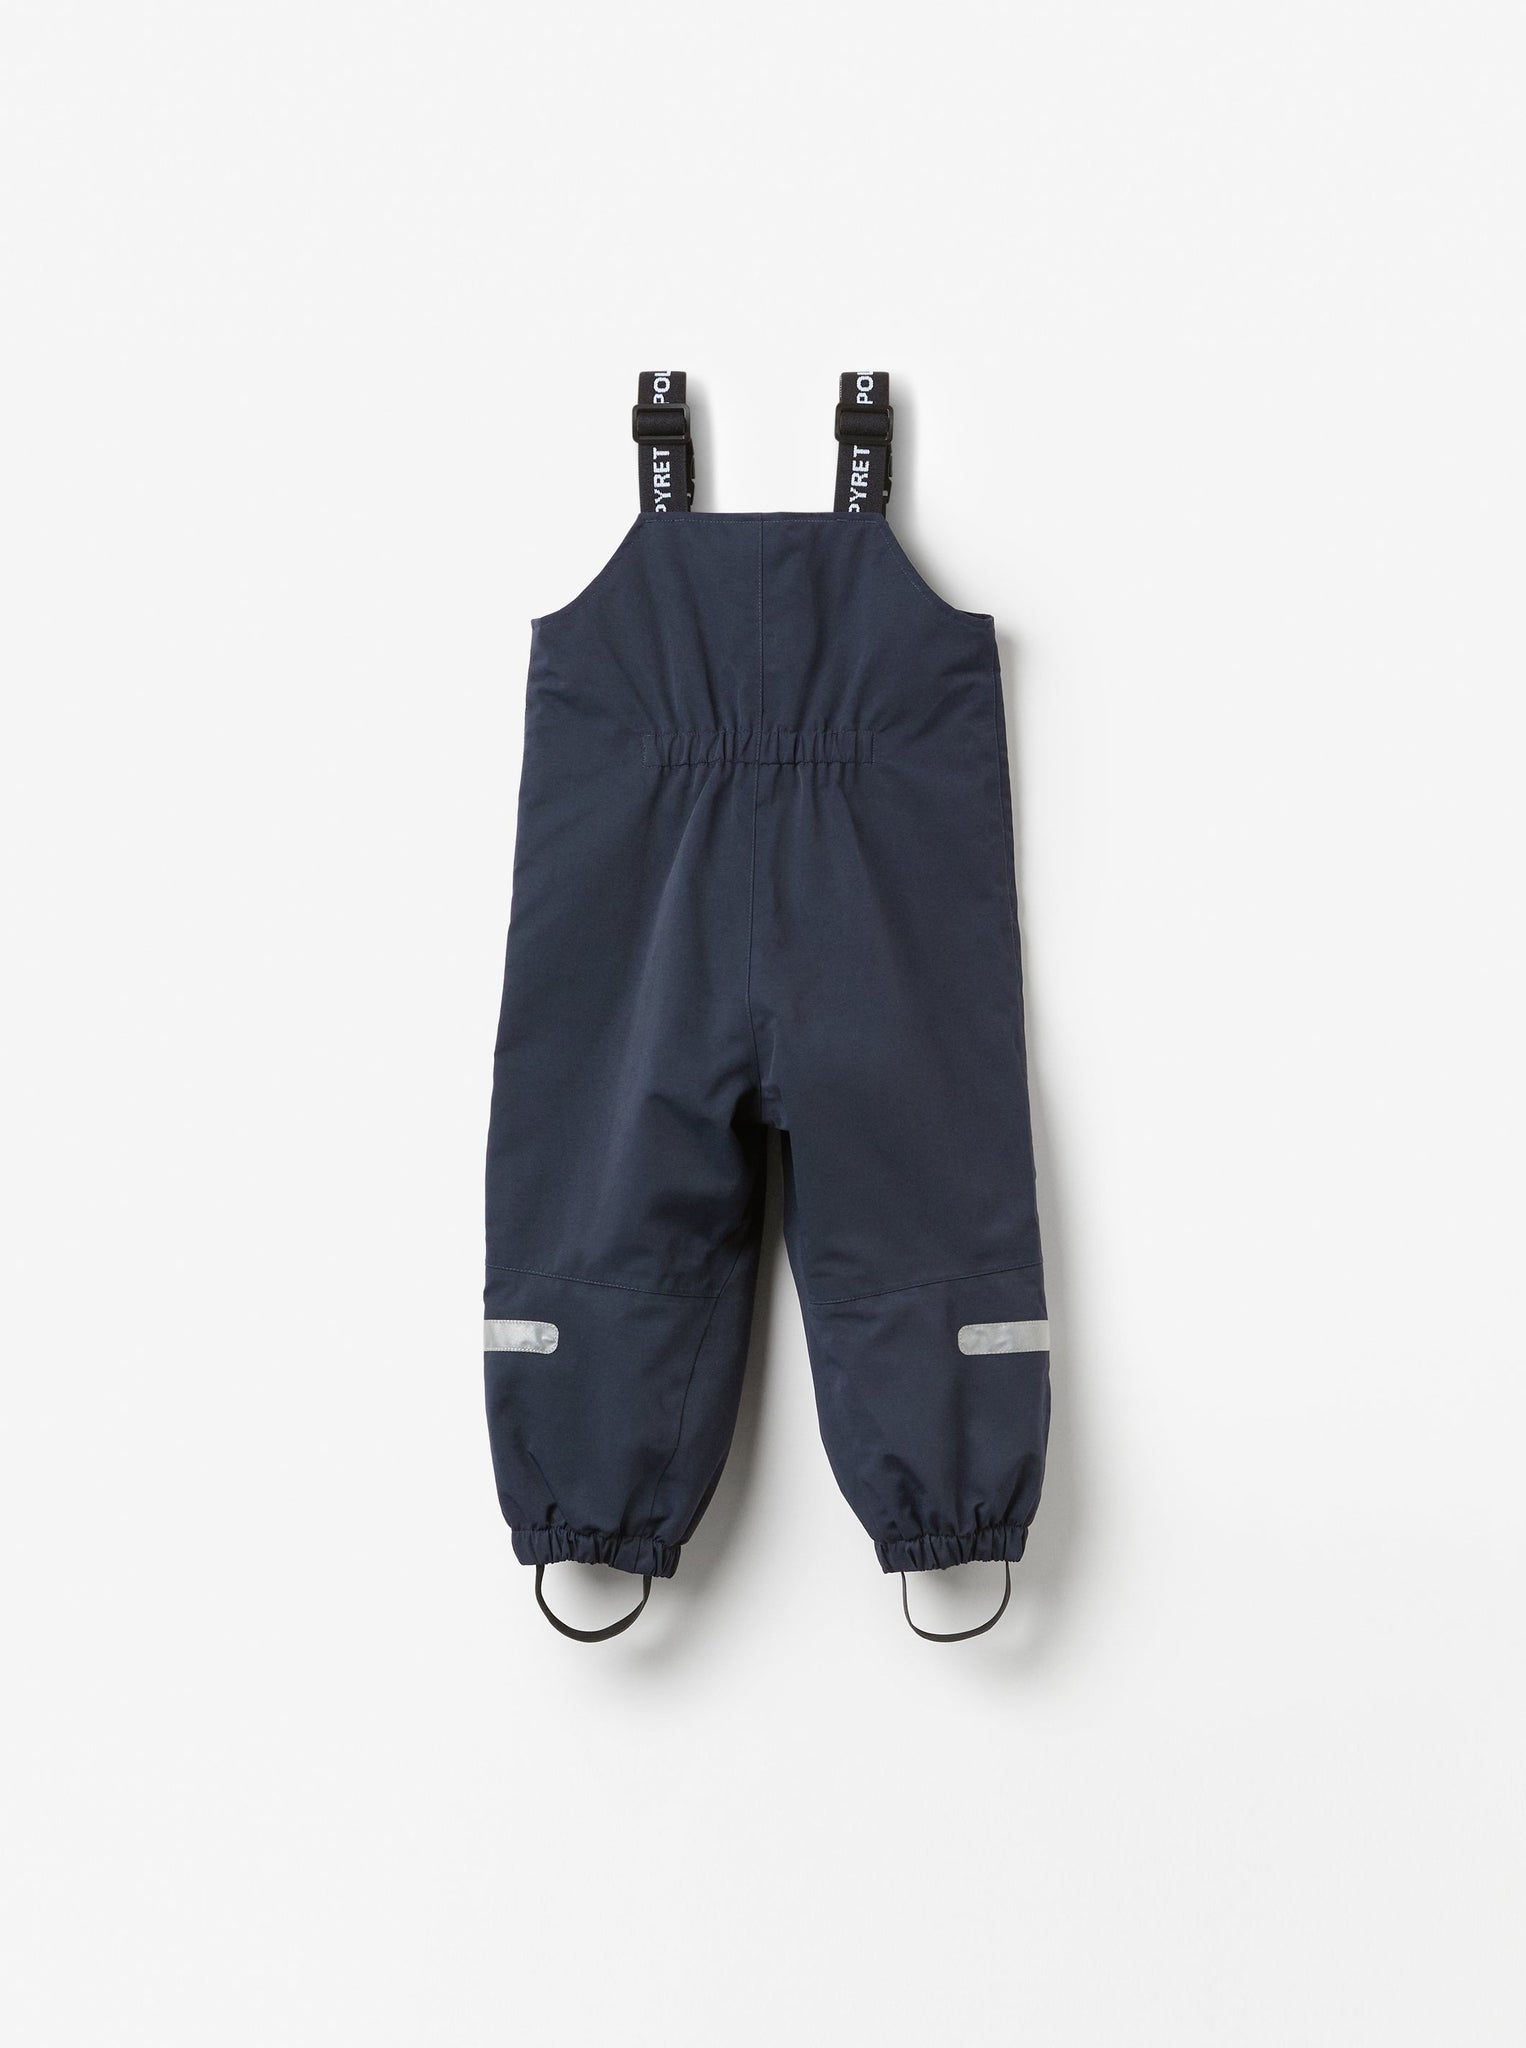 Navy Kids Waterproof Trousers from the Polarn O. Pyret kidswear collection. The best ethical kids outerwear.